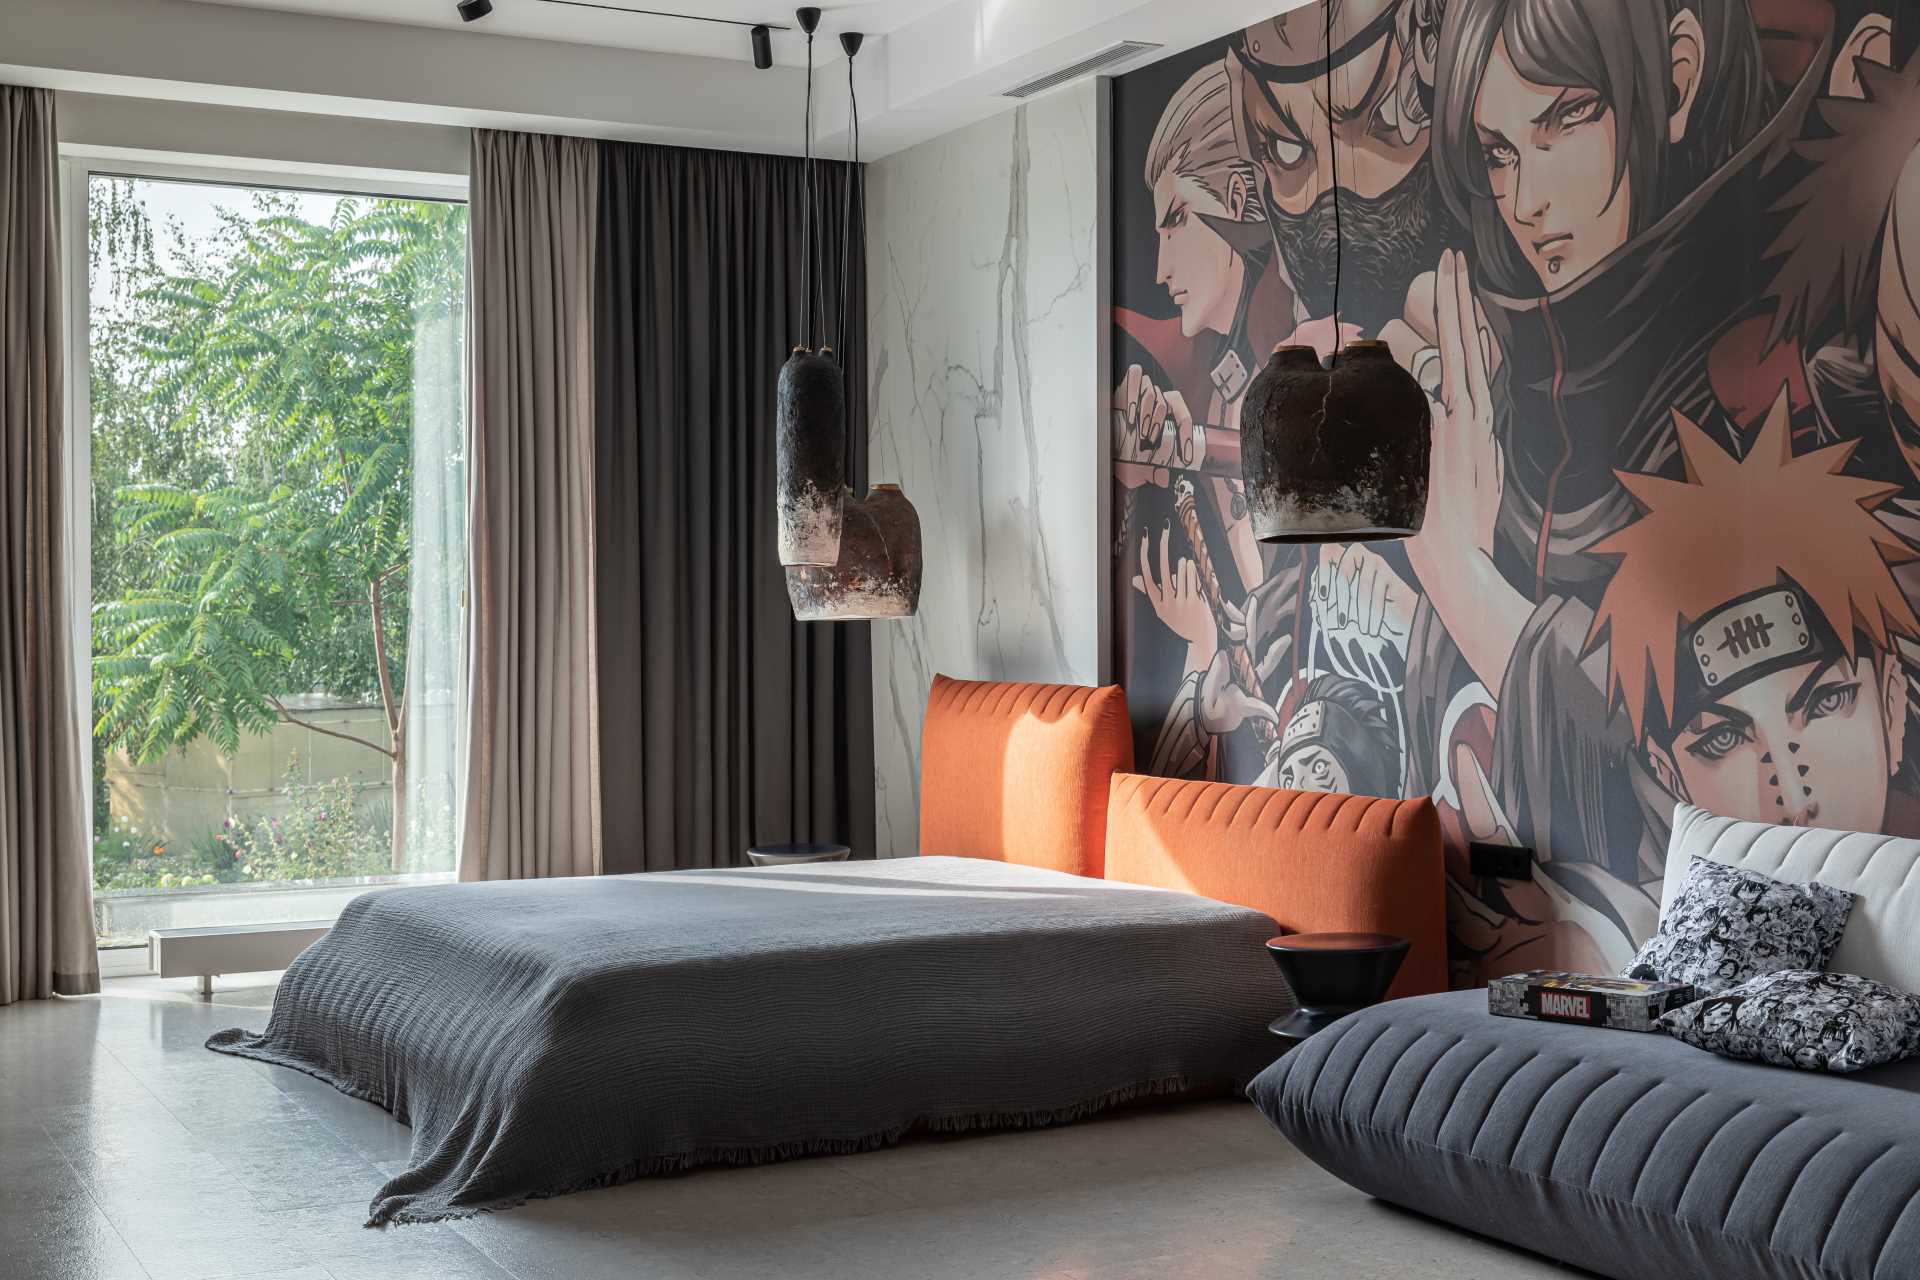 In this modern bedroom, a large mural covers the wall, while the furniture colors complement the artwork.